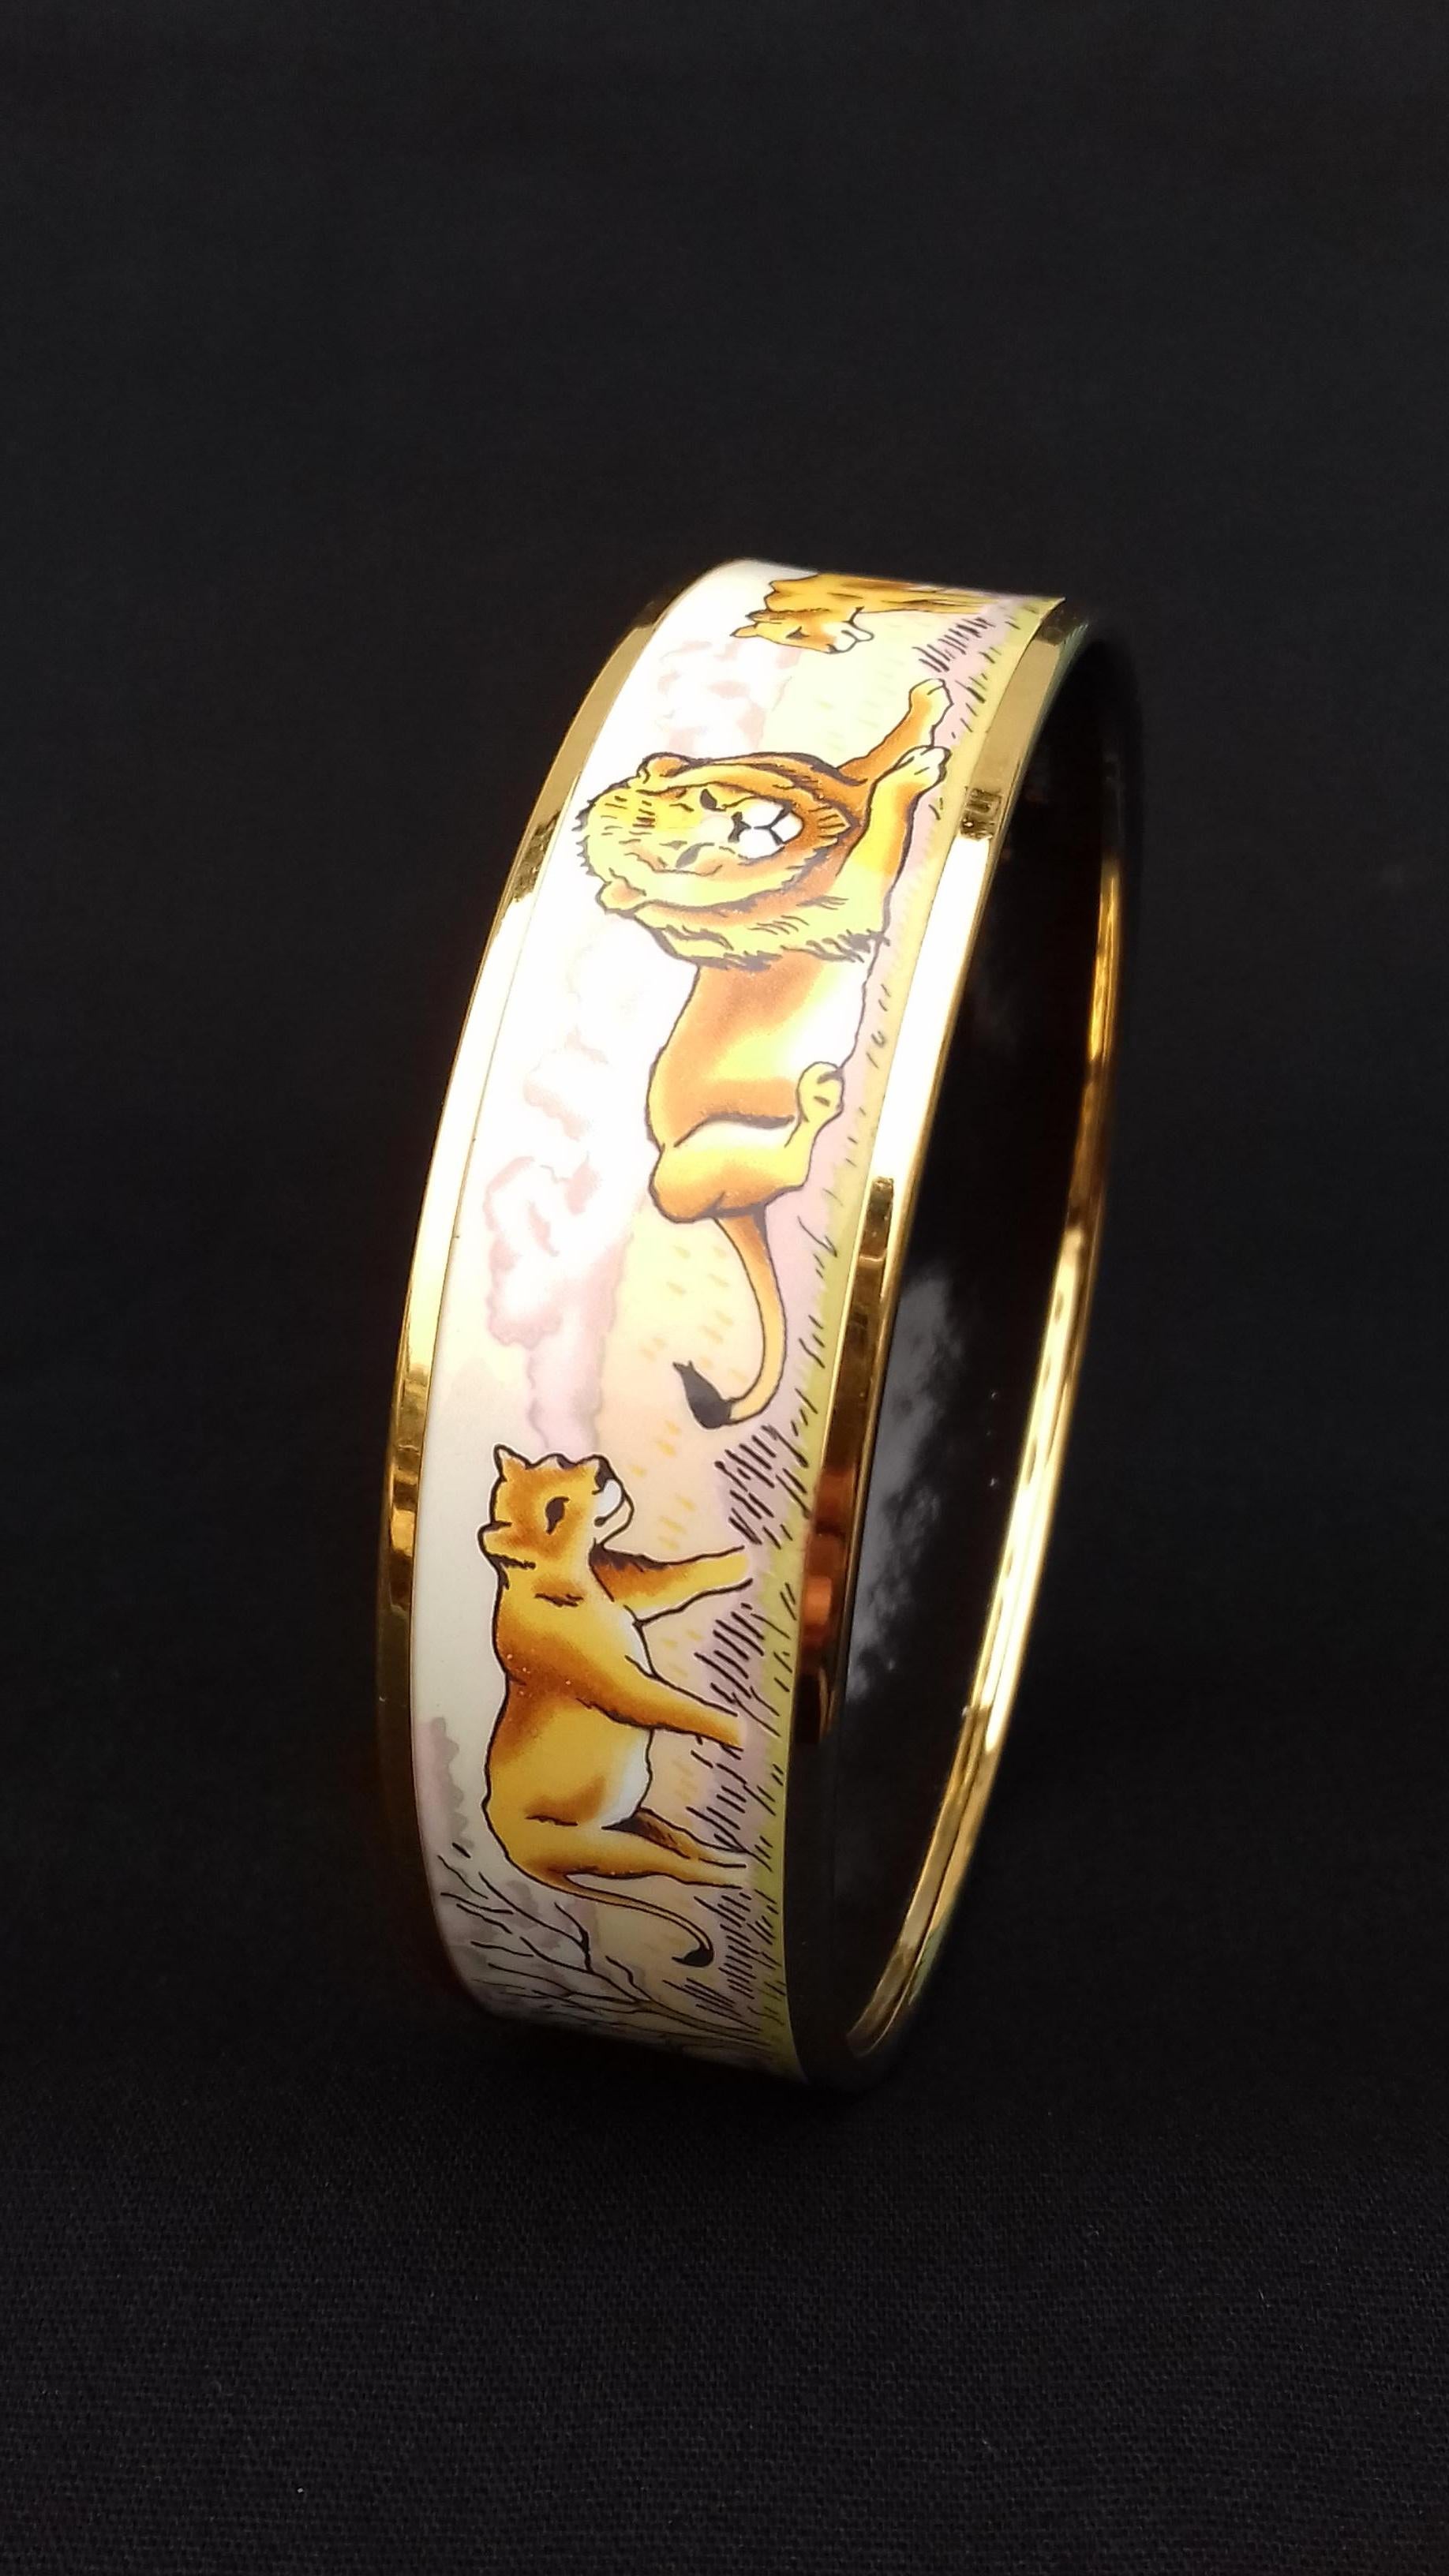 Gorgeous Authentic Hermès Bracelet

Pattern: Lions and Lionesses in Savannah

Rare and bautiful !

Made in Austria

Made of enamel printed and gold plated hardware

Colorways: Beige/Orange, Parma/Purple, Camel/Brown

